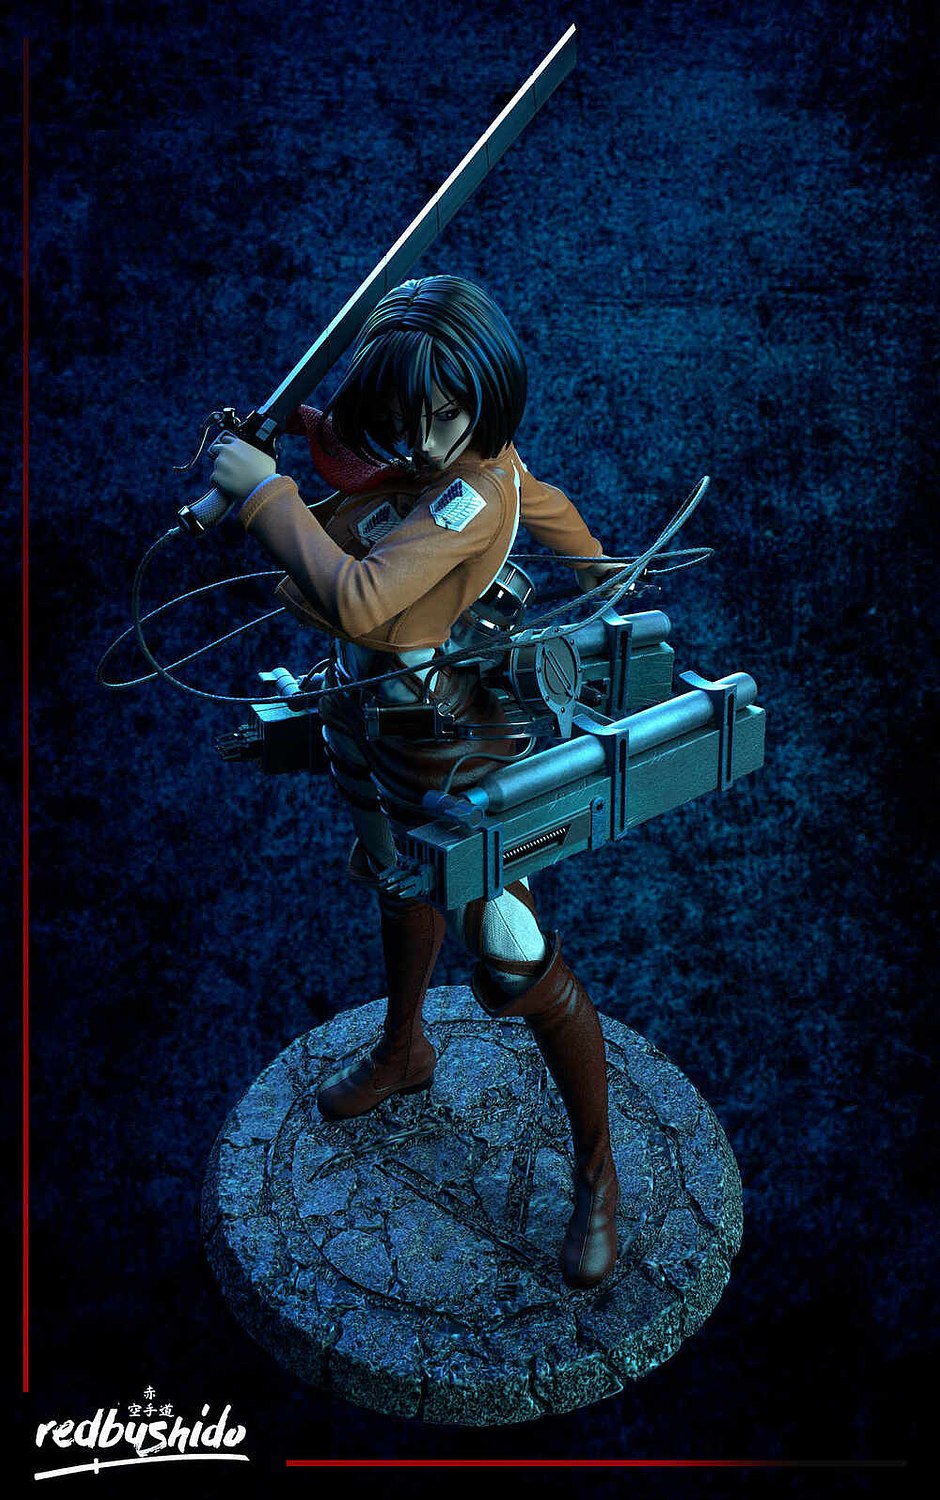 Mikasa Standing Pose from Attack on Titan